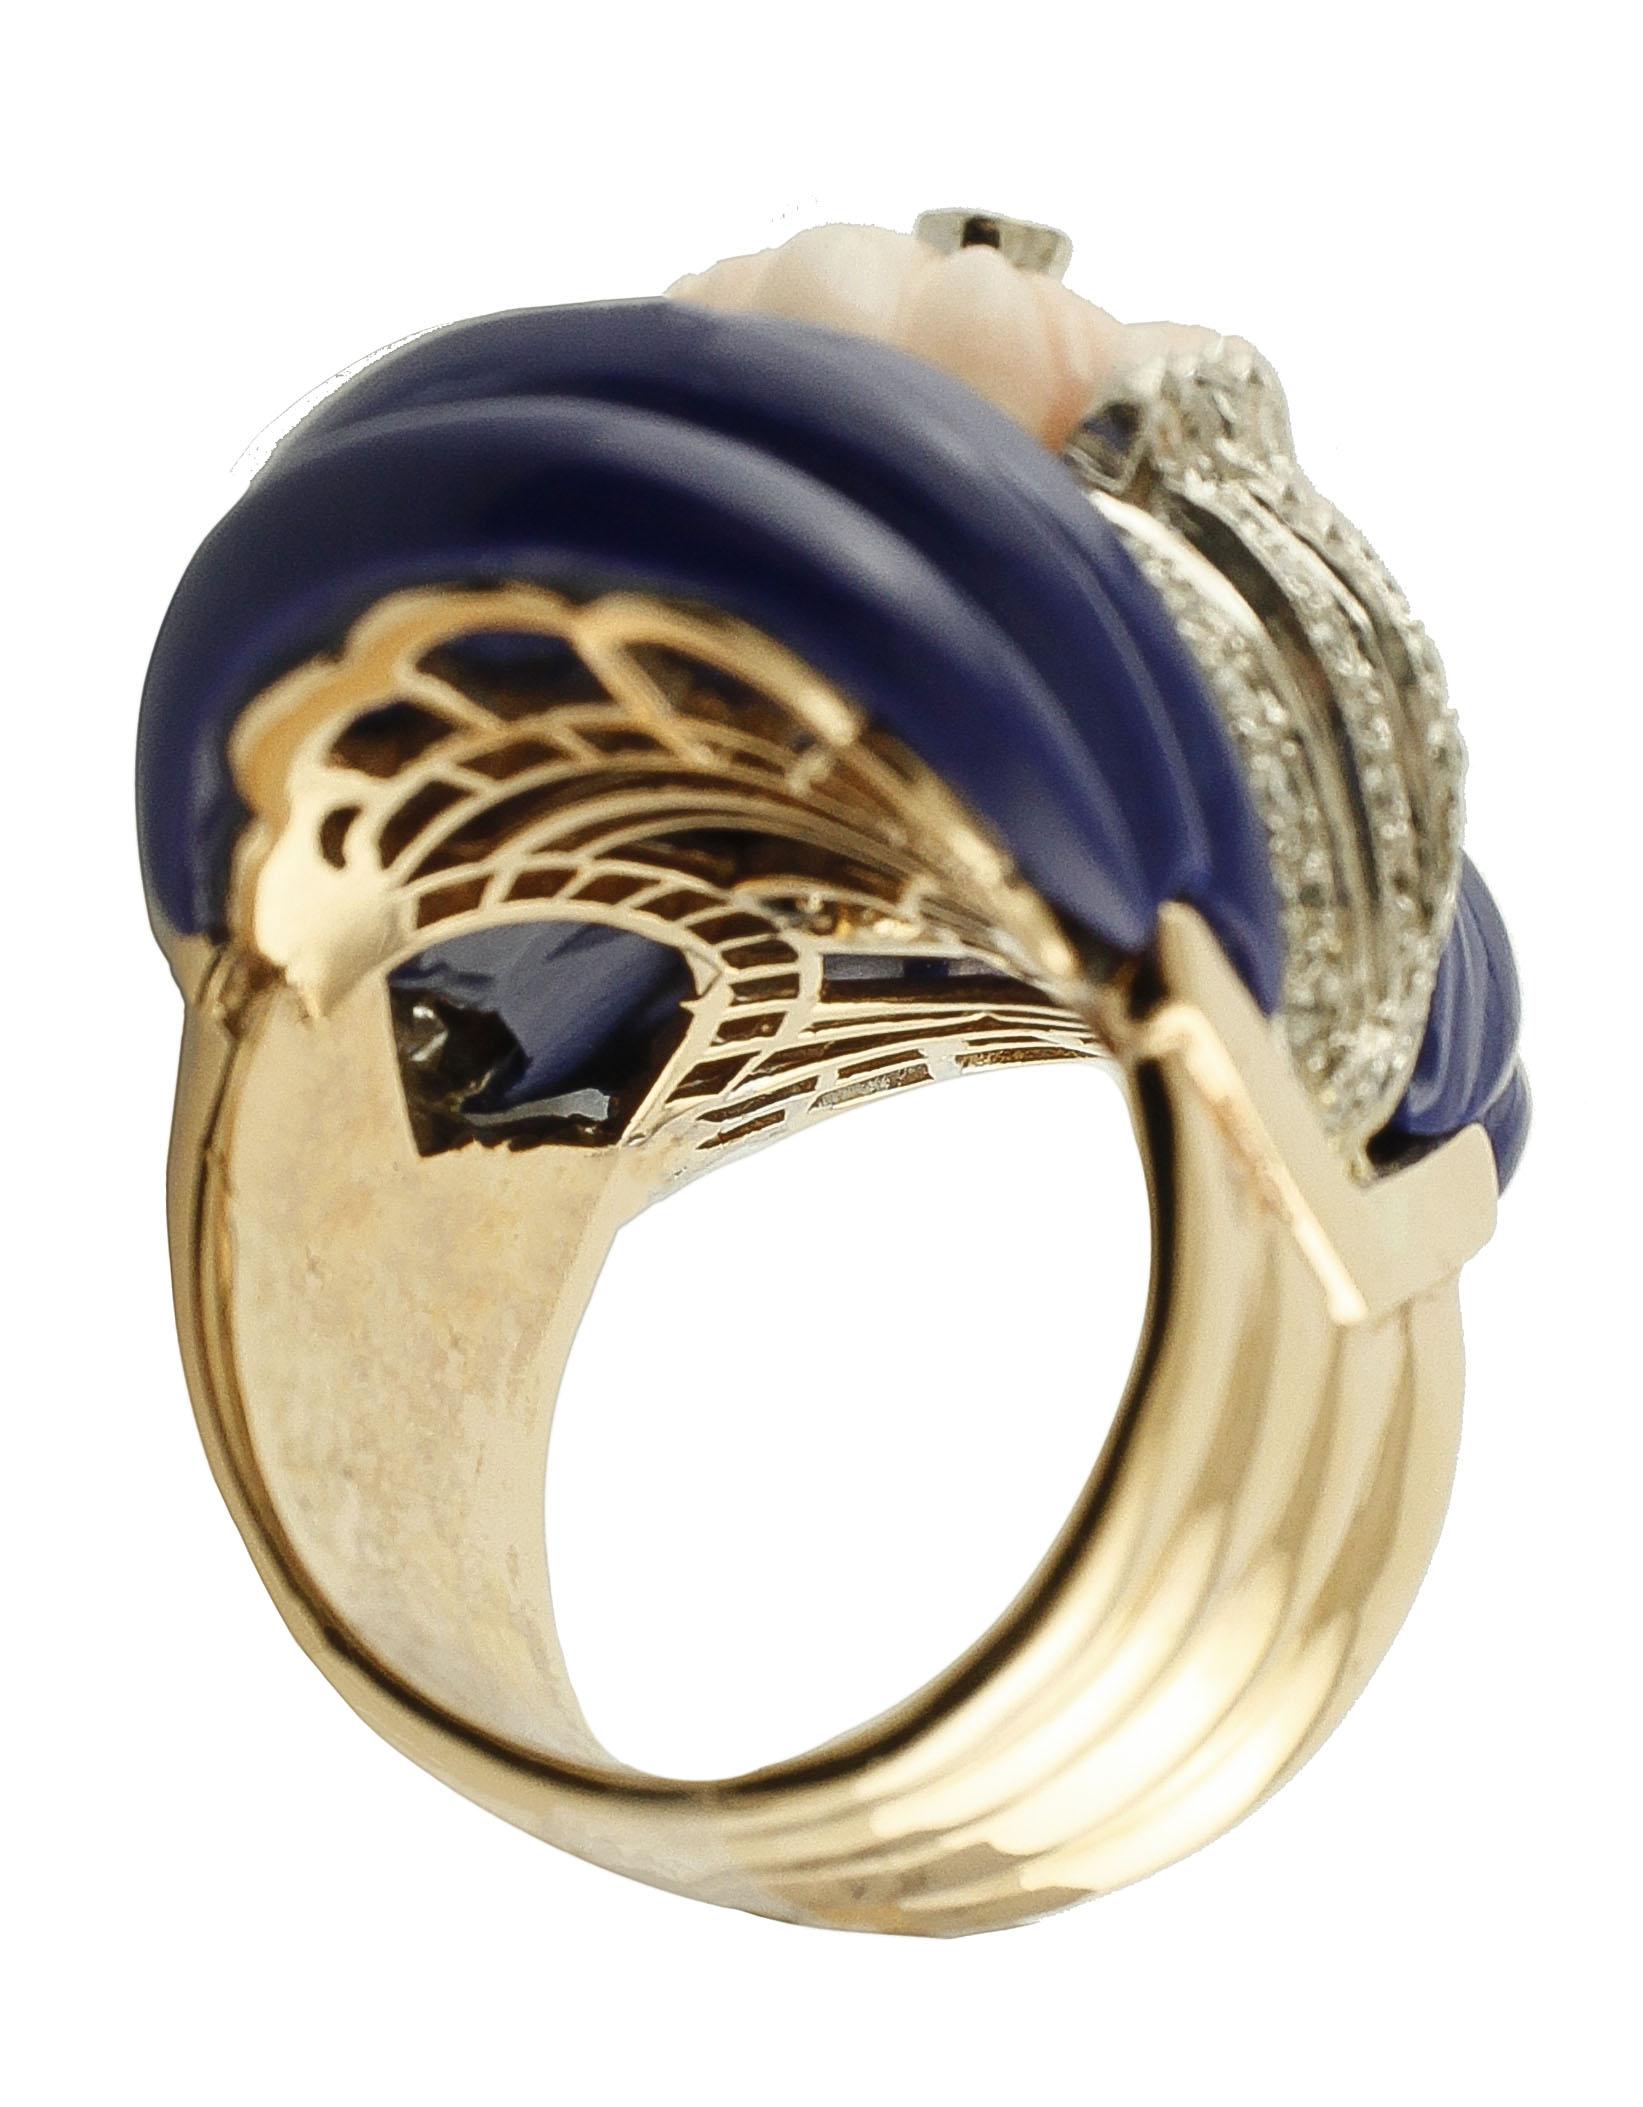 Brilliant Cut 1.44 Carat Diamonds, 1.30 G Pink Coral, 5.40 G Lapis Rose and Gold Fashion Ring For Sale